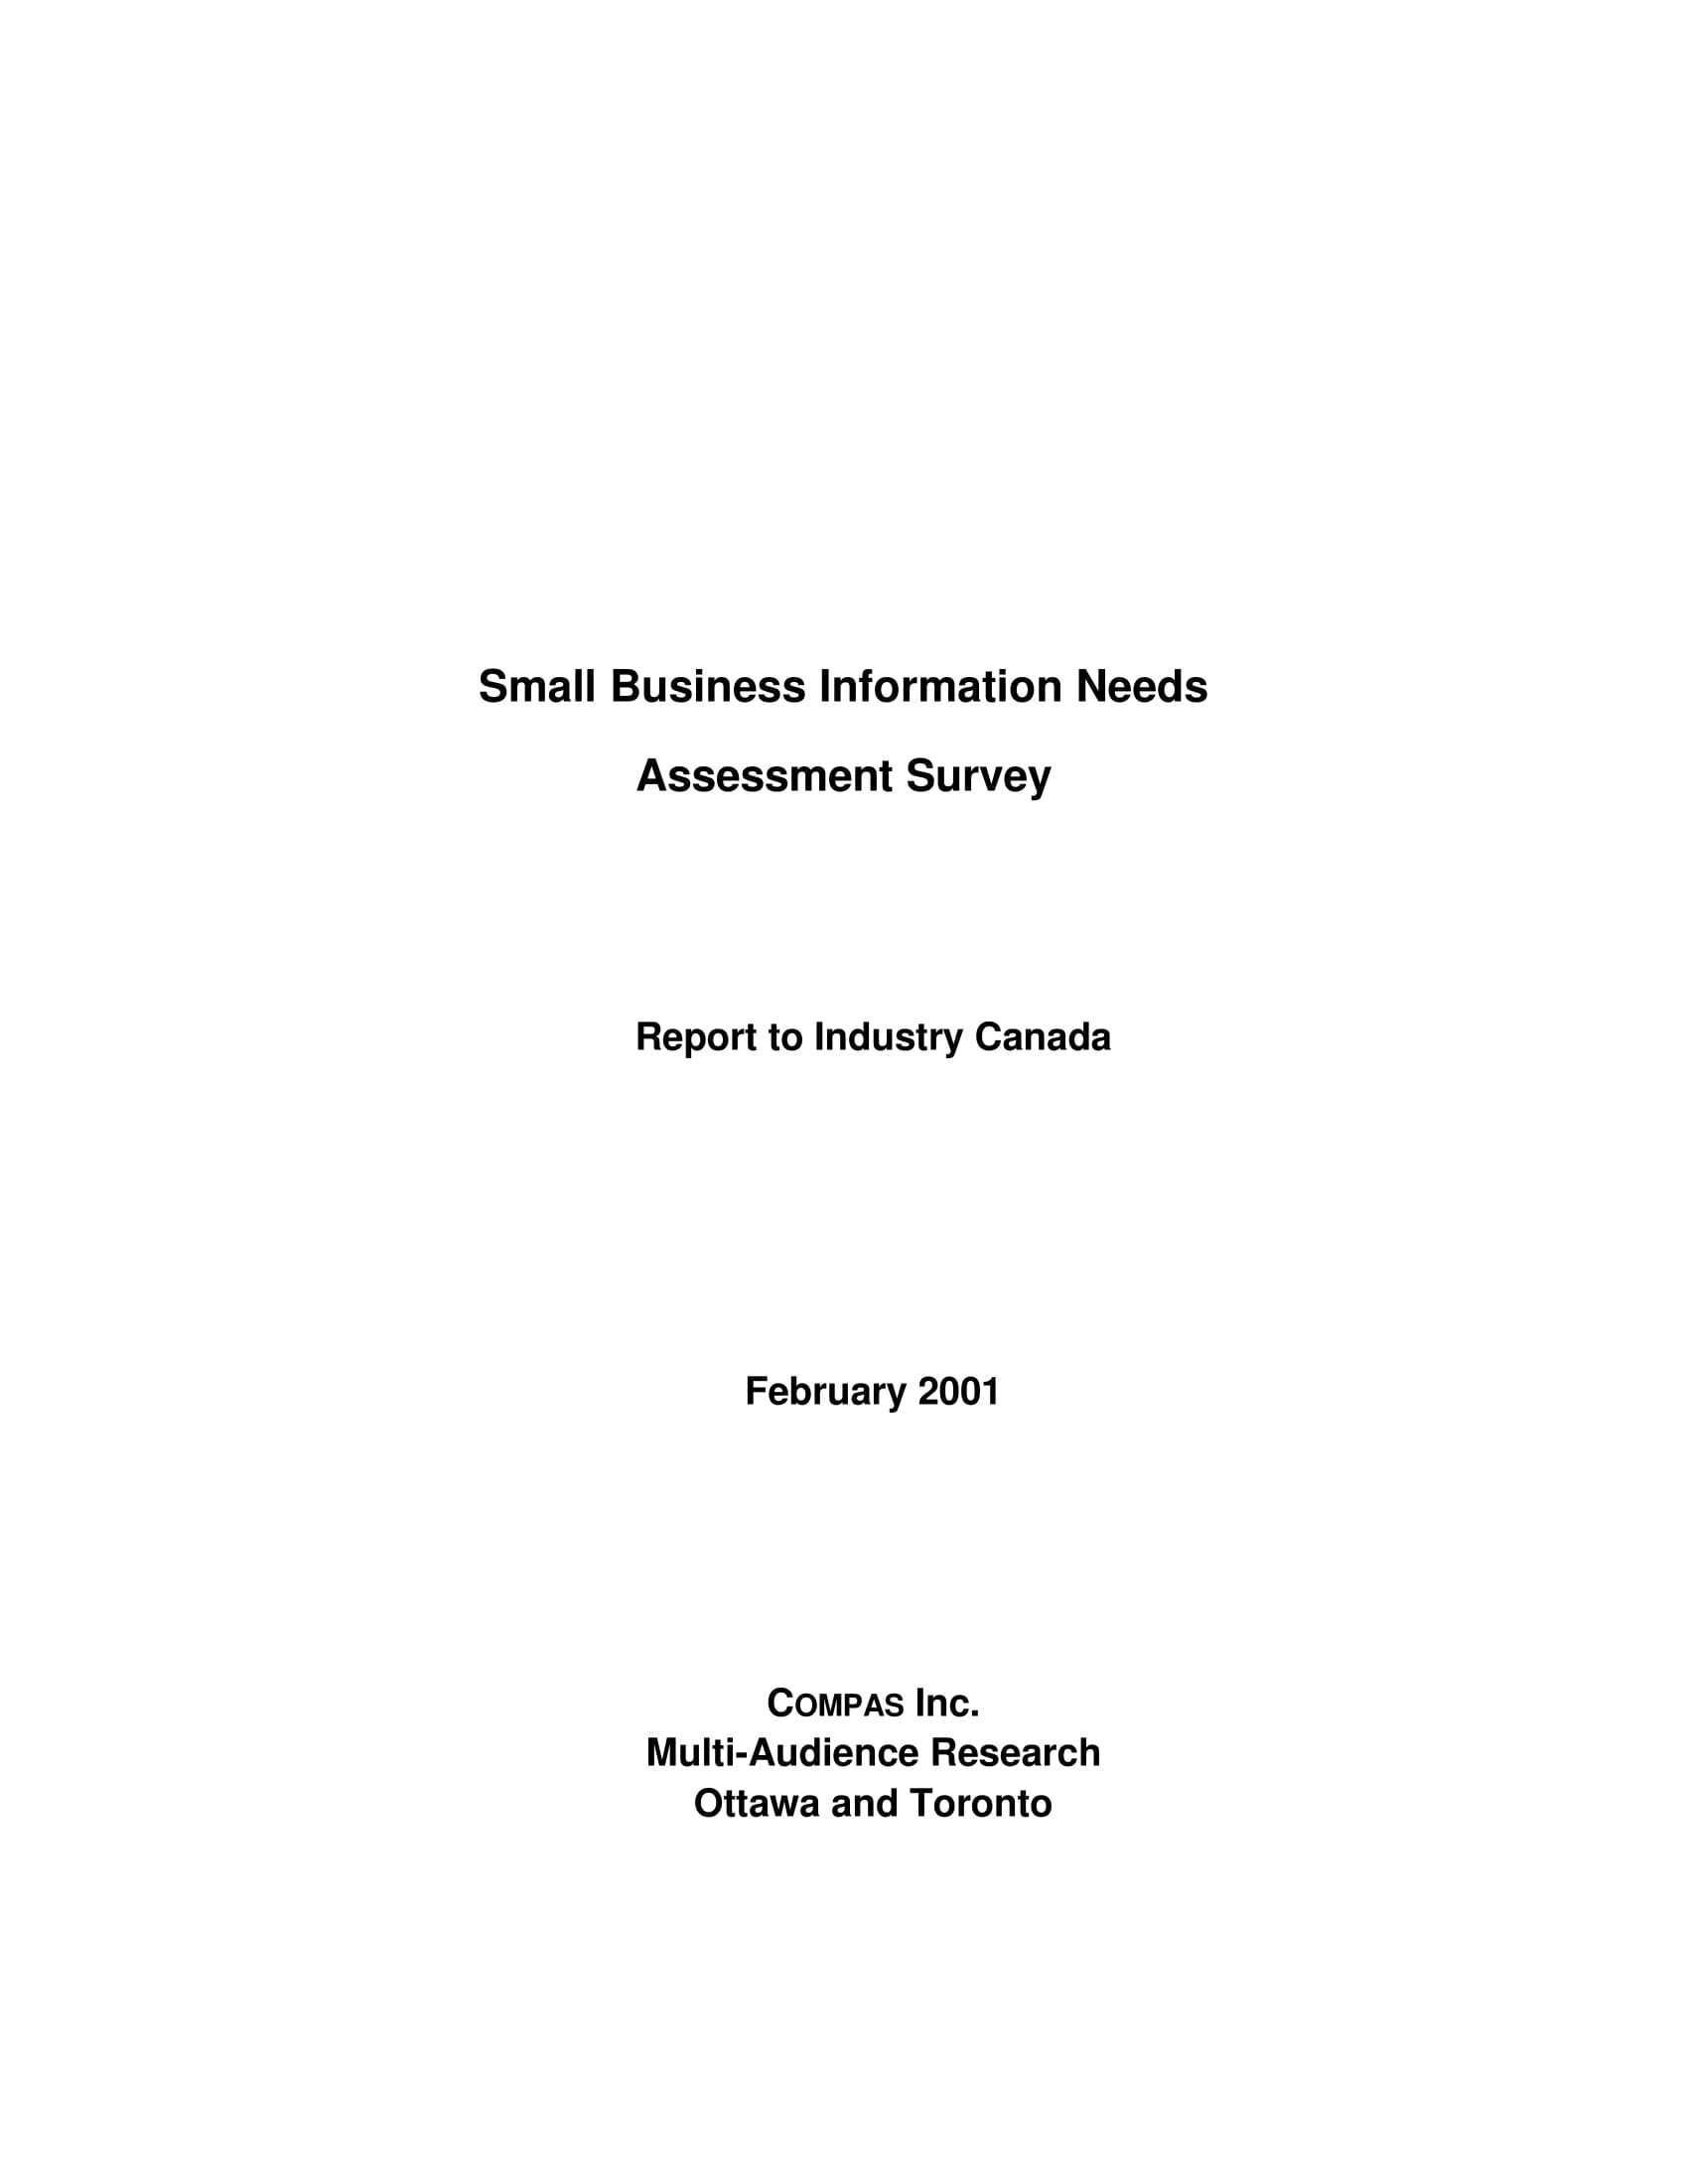 Small Business Needs Assessment Survey Report Example